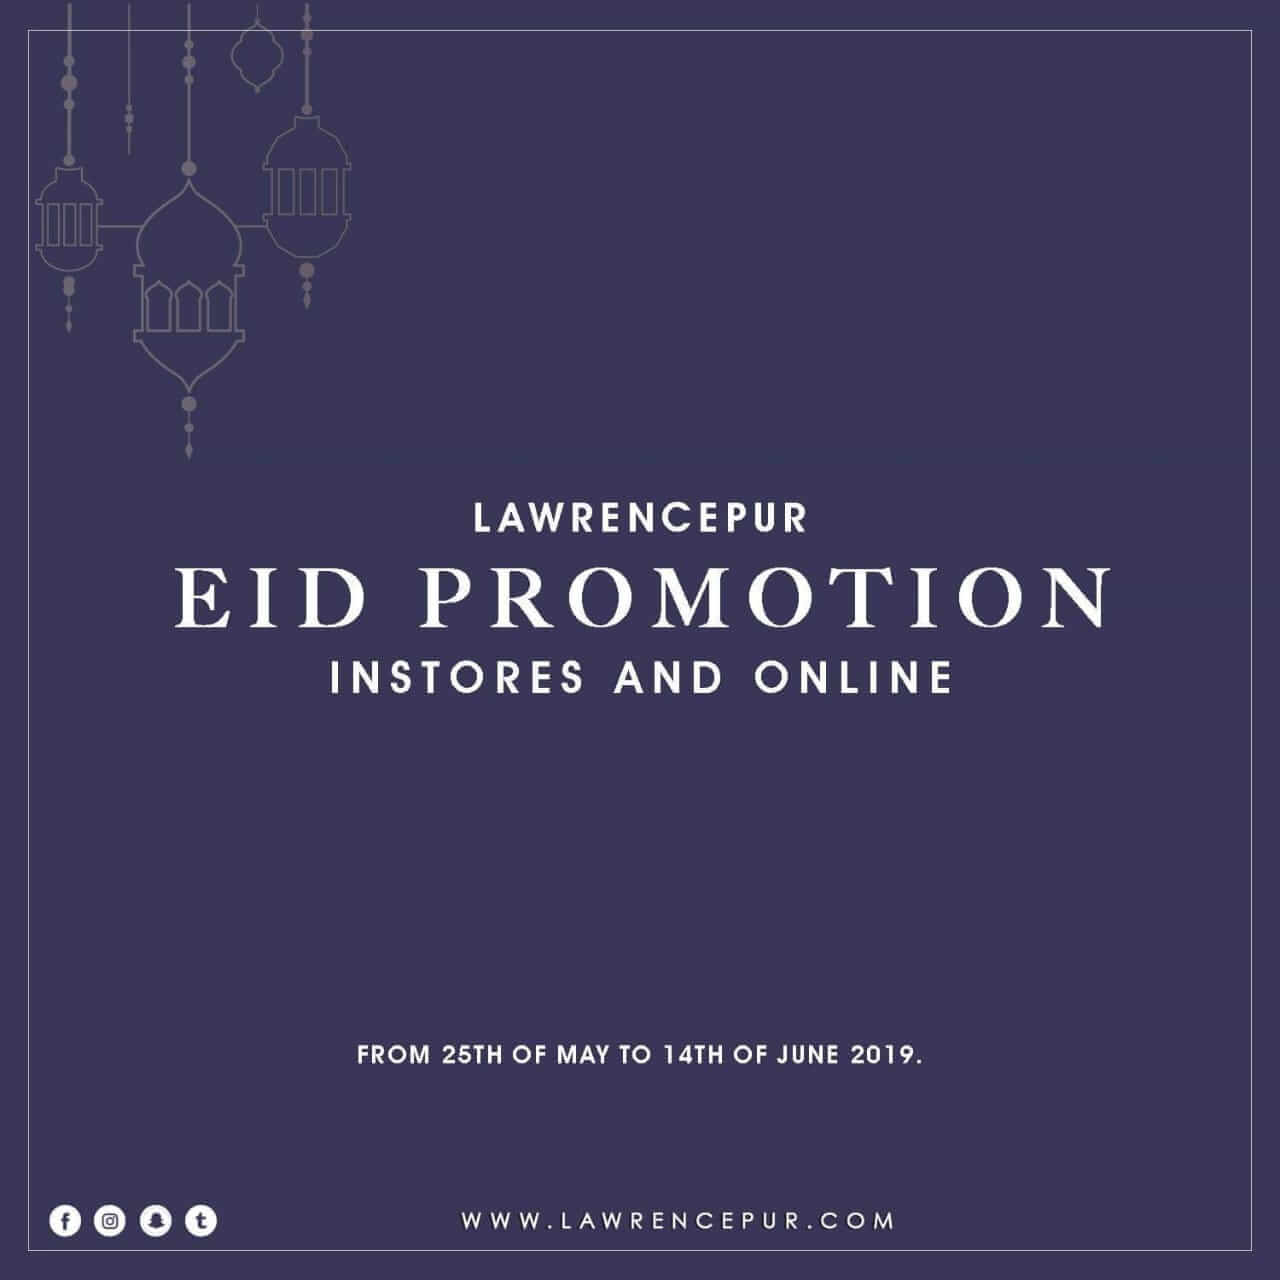 Avail Lawrencepur’s Eid Promotion from 25th May to 14th June